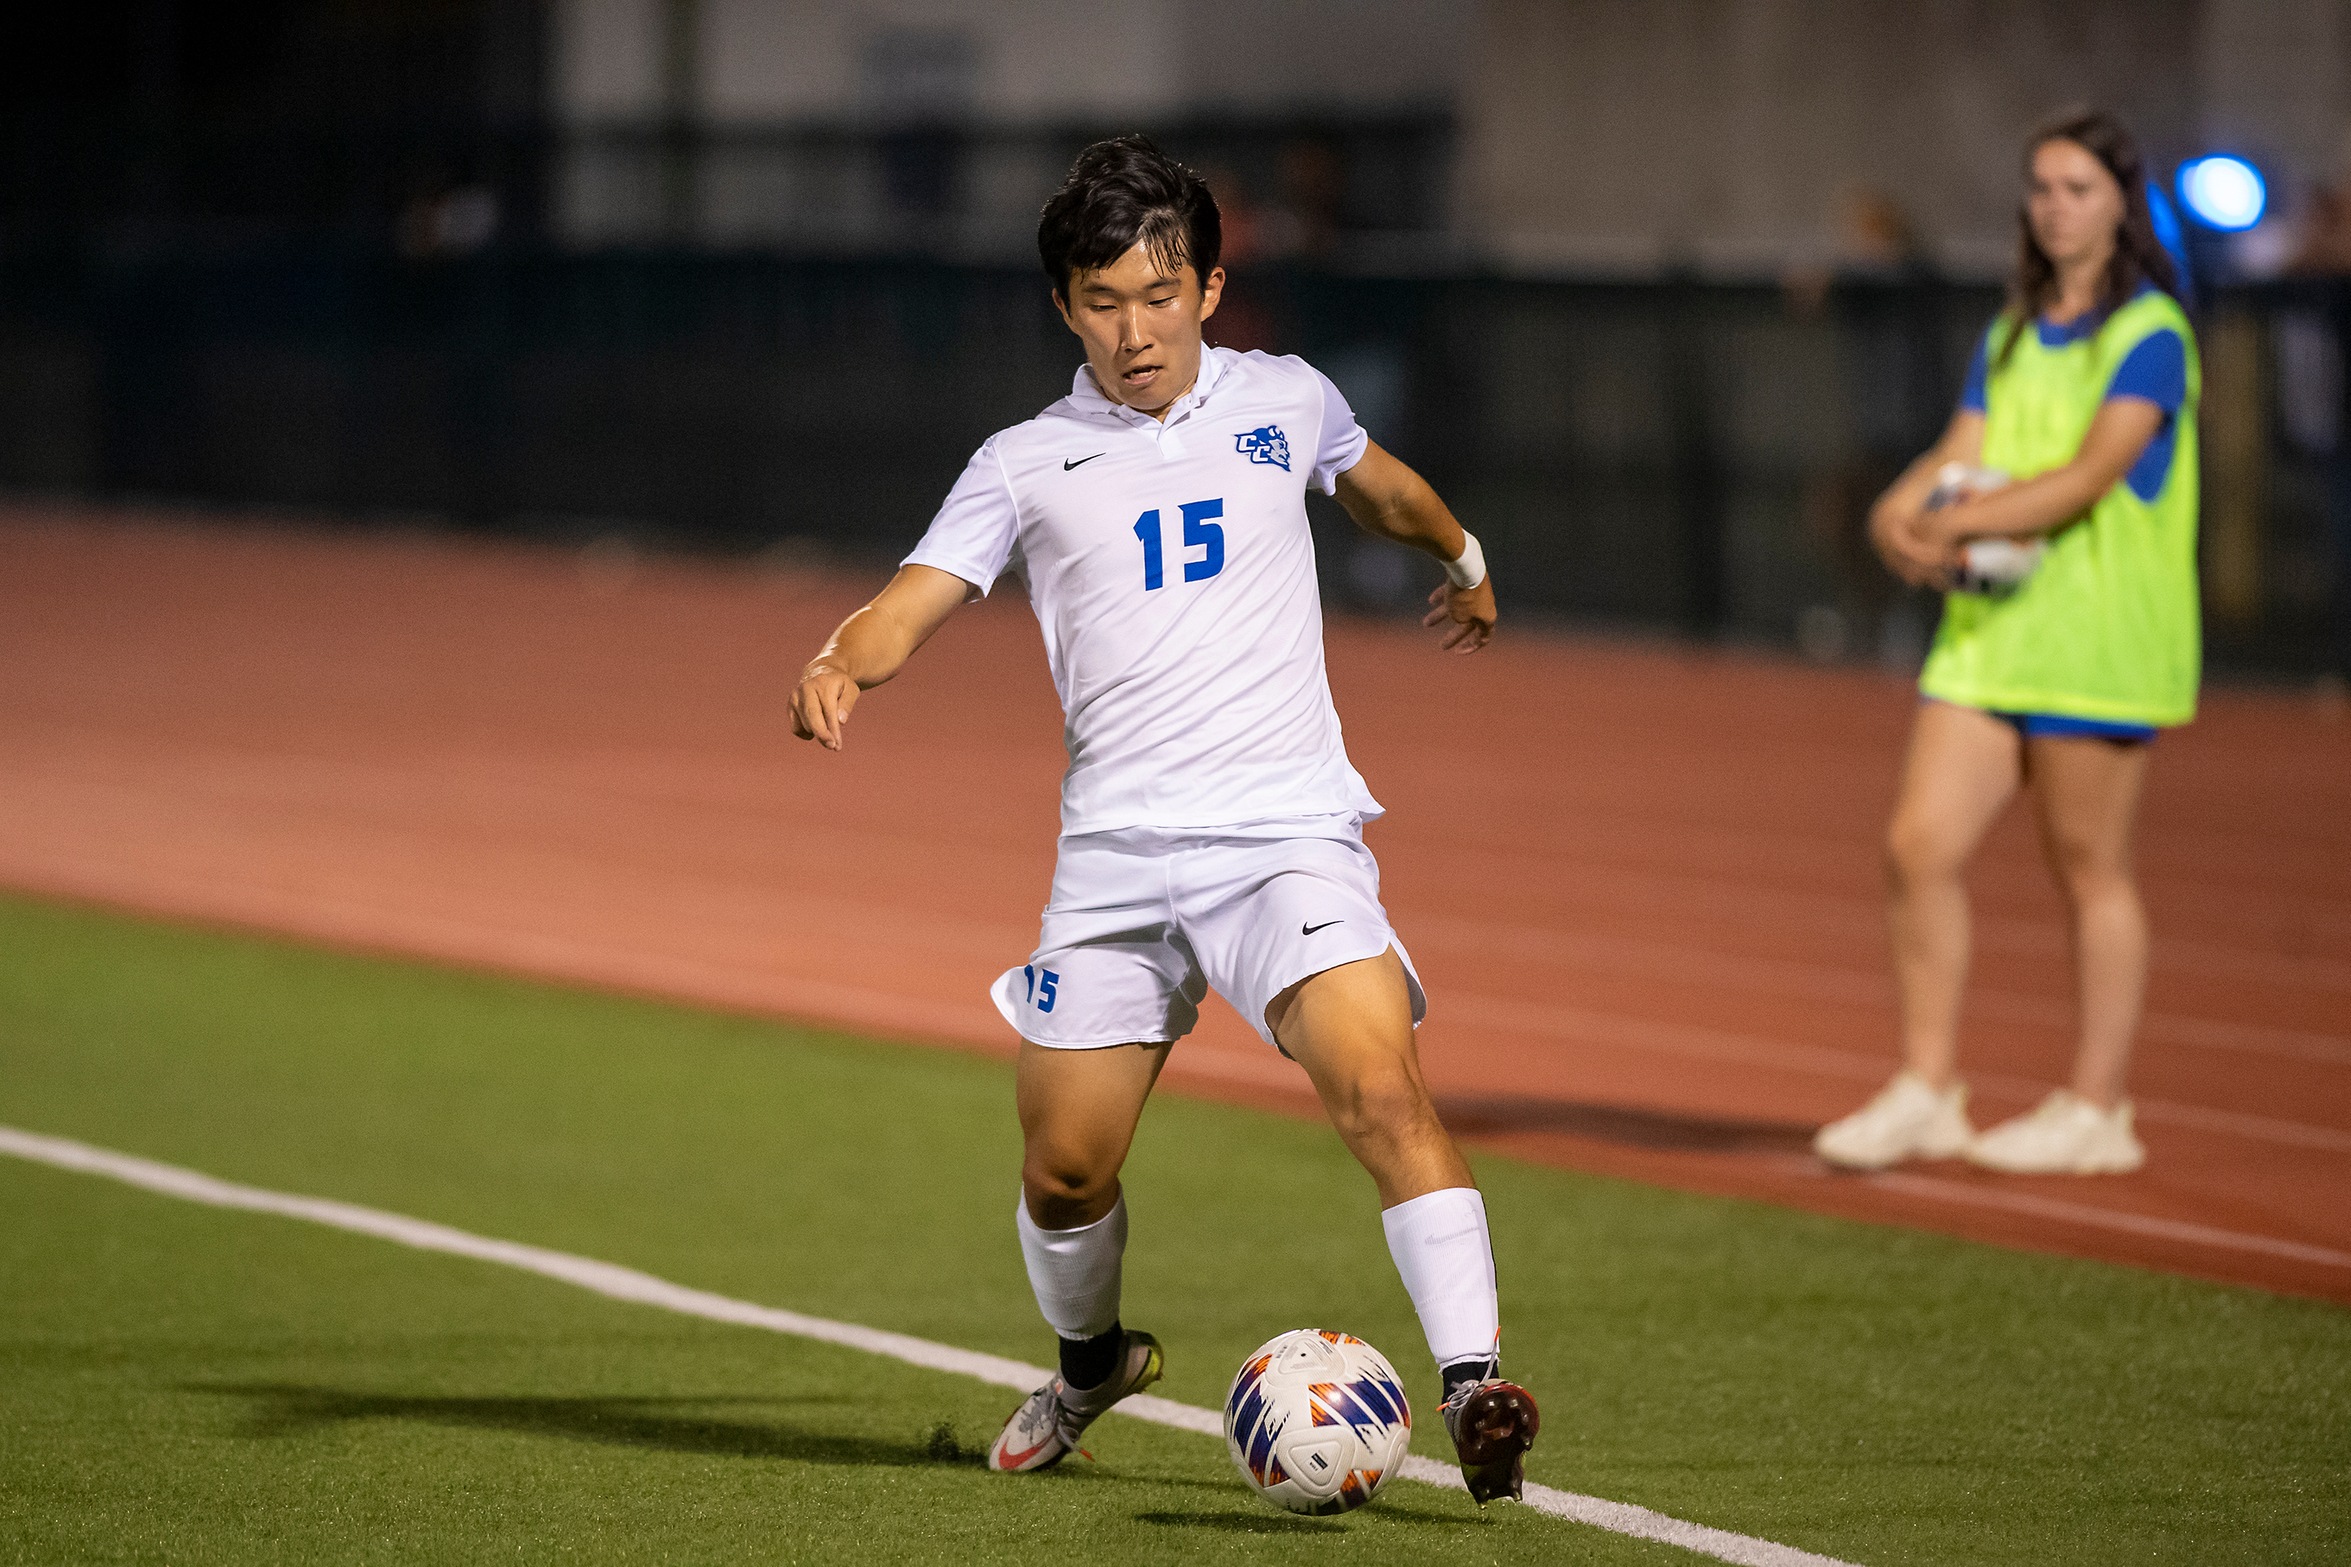 Taein Ka scored his first career goal for CCSU in Monday's win.